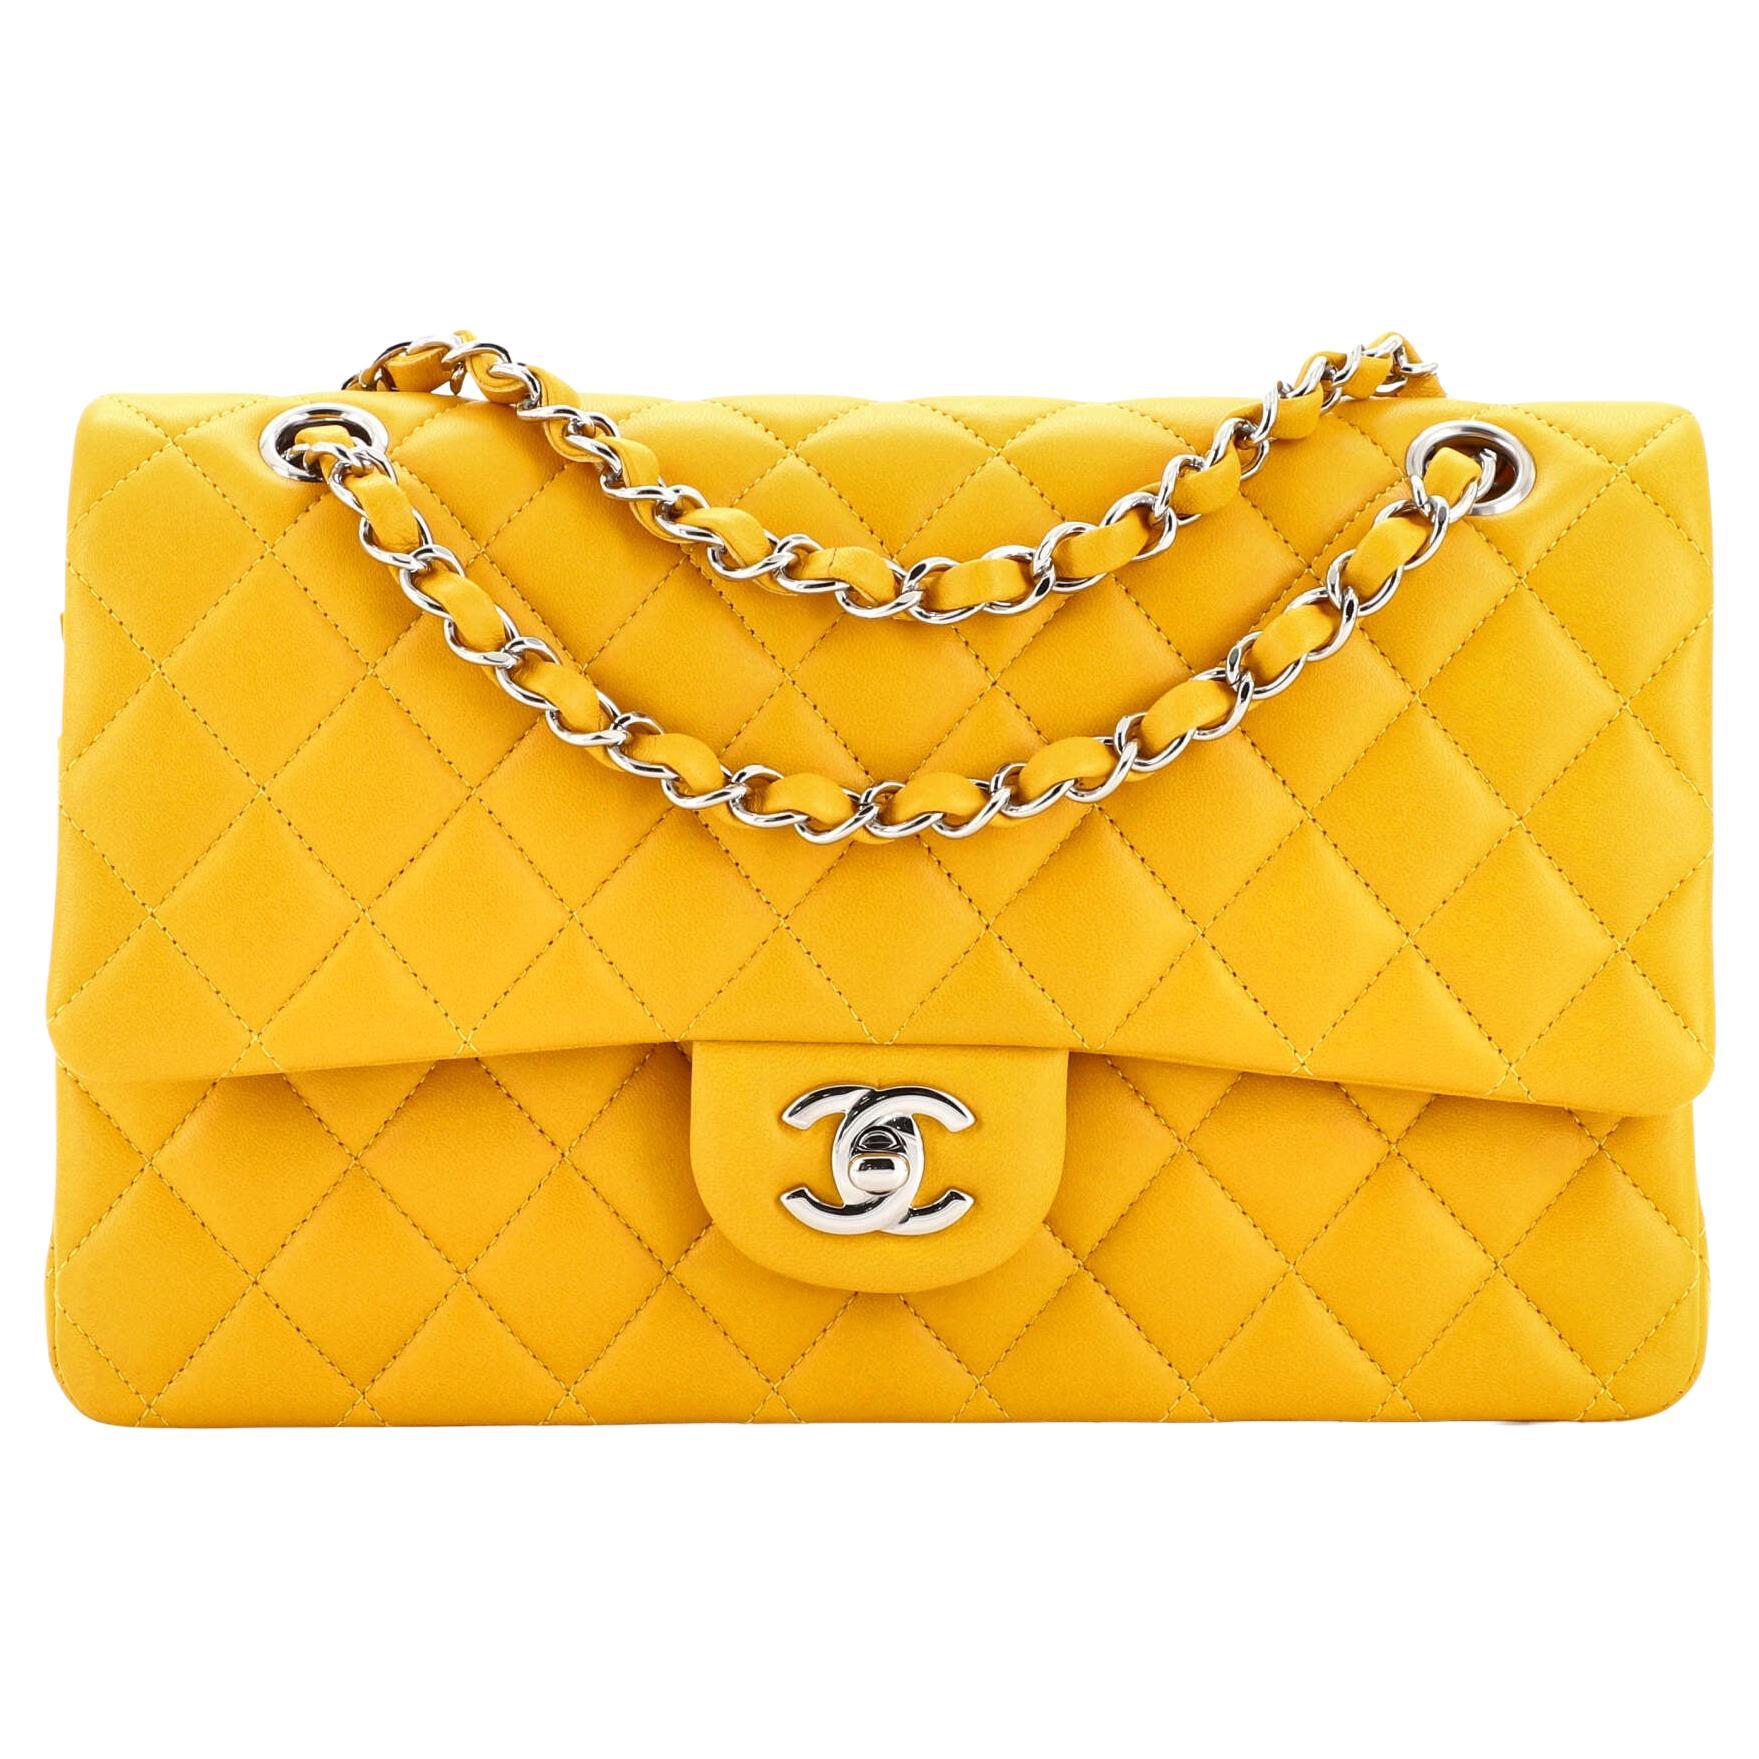 Chanel Classic Double Flap Bag Quilted Lambskin Medium